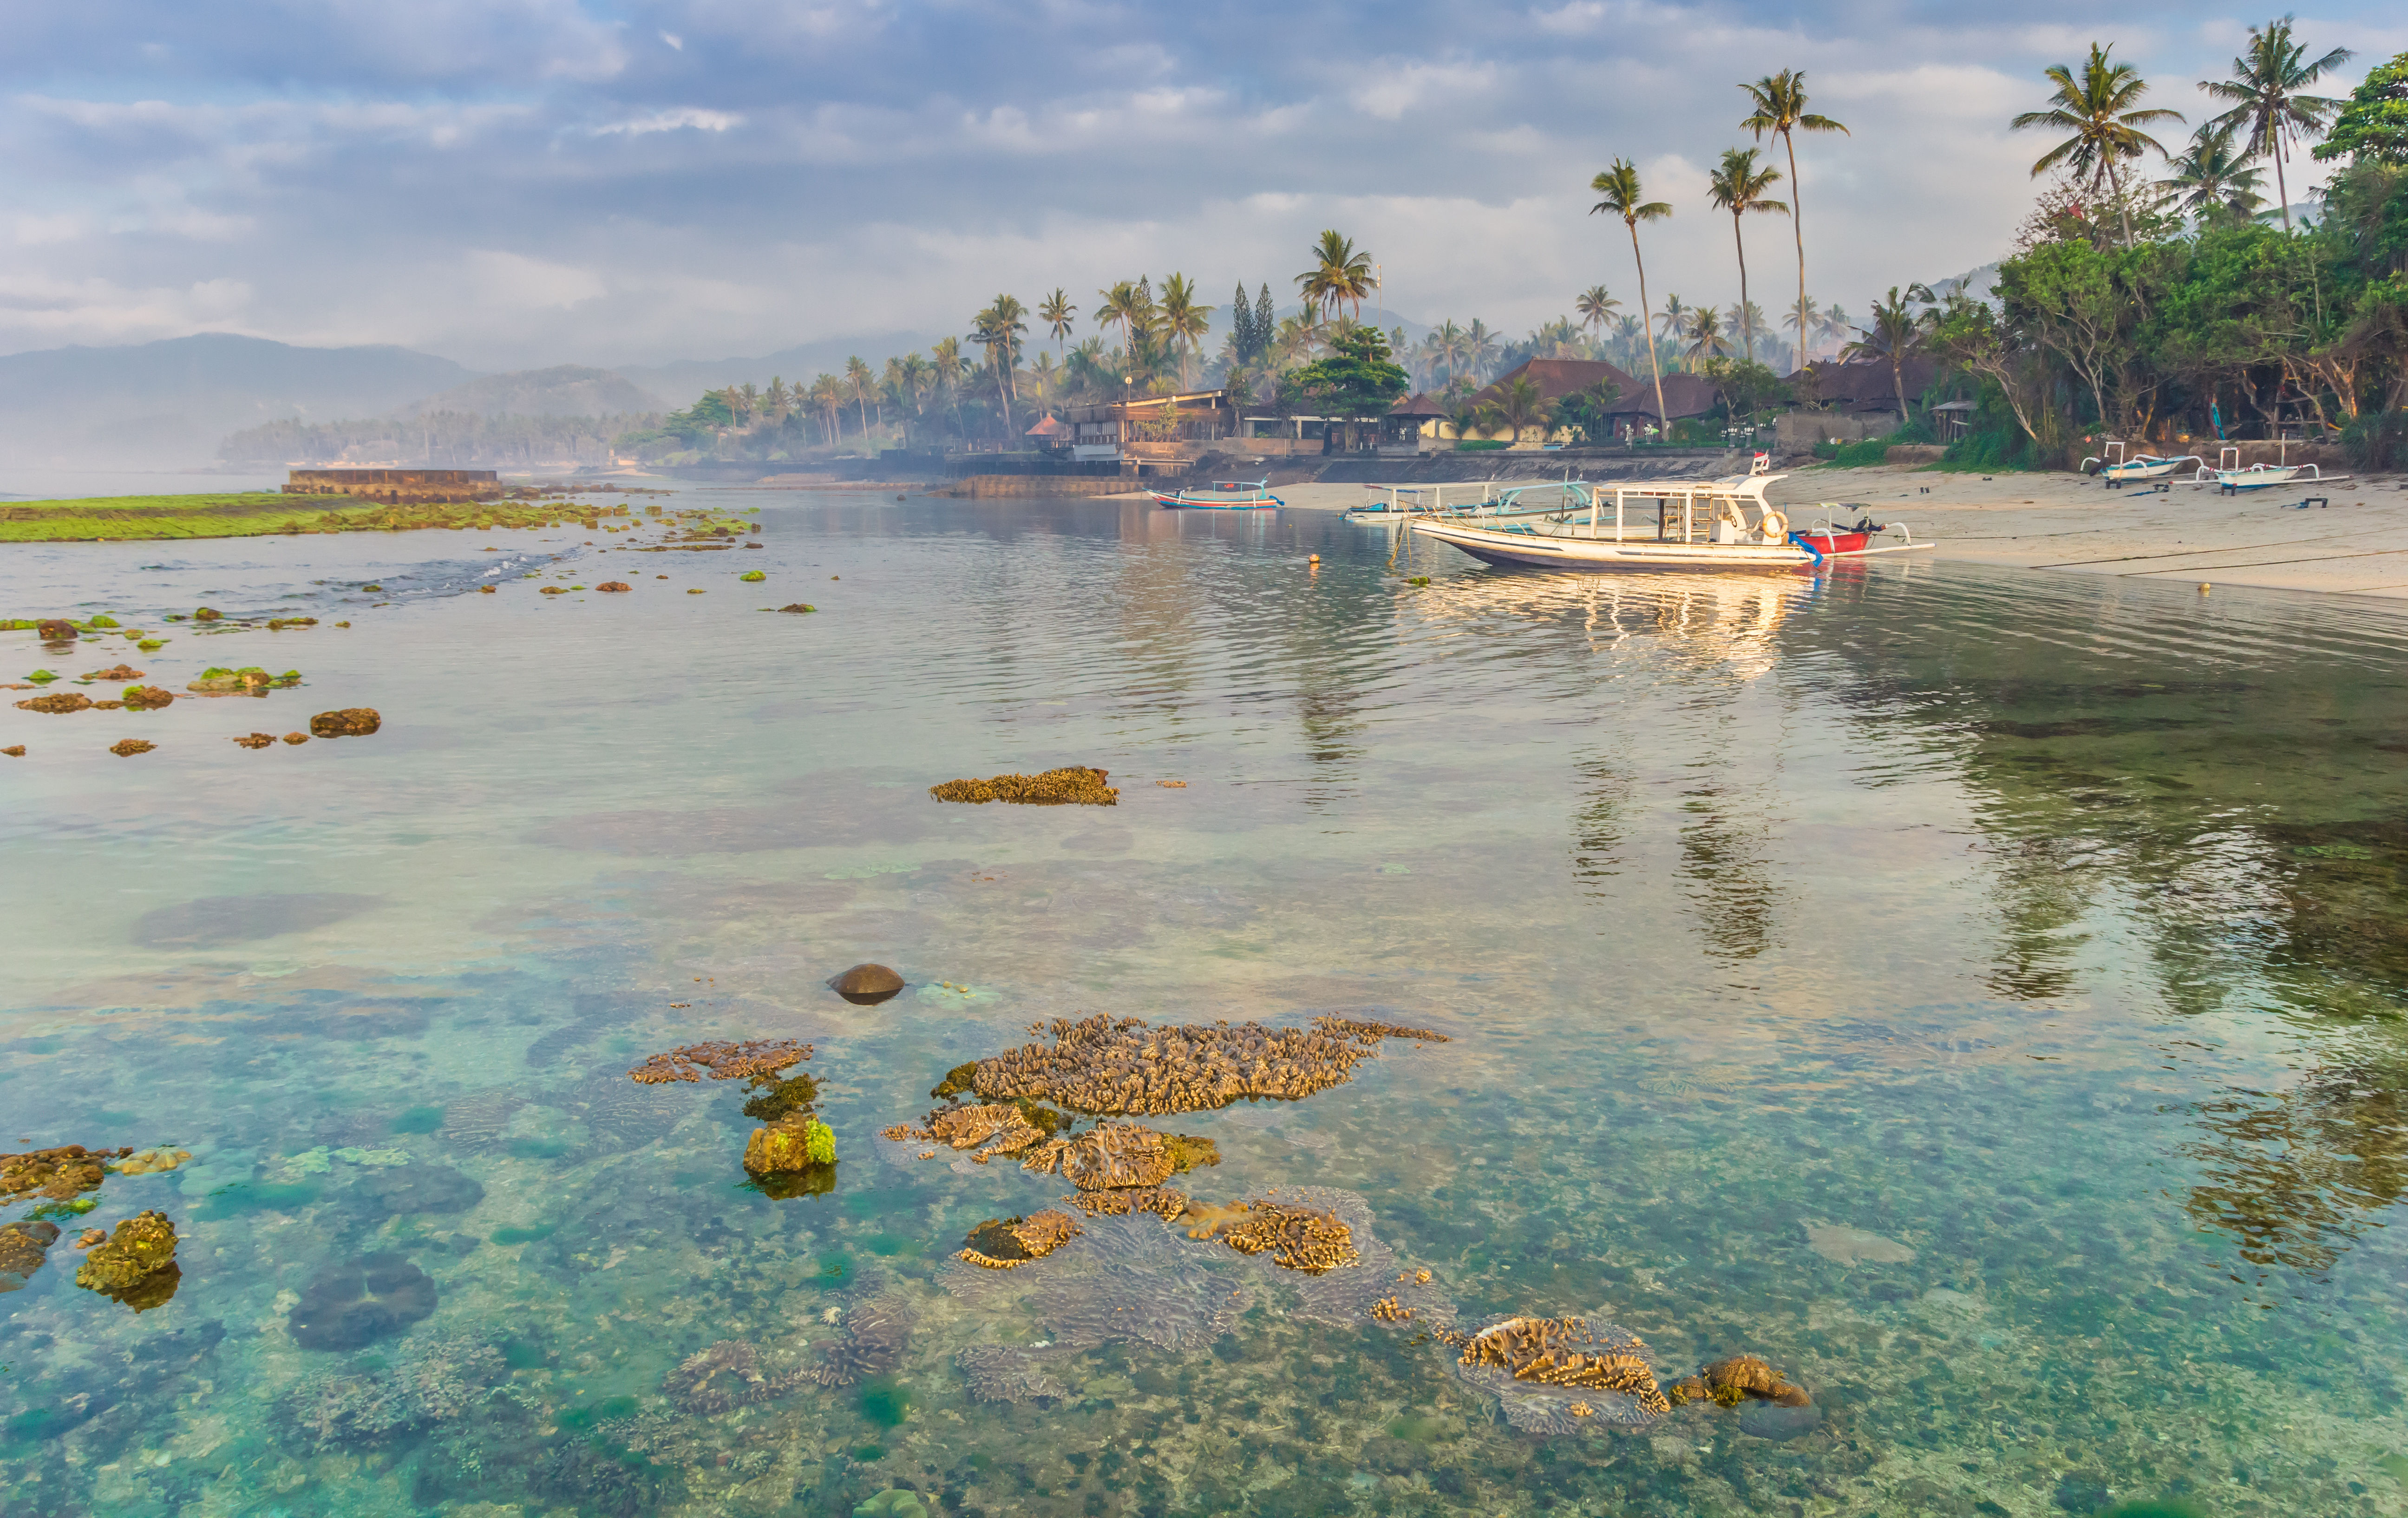 Shallow reef coral in crystal clear waters, moored boats and palm trees in Candi Dasa Beach.